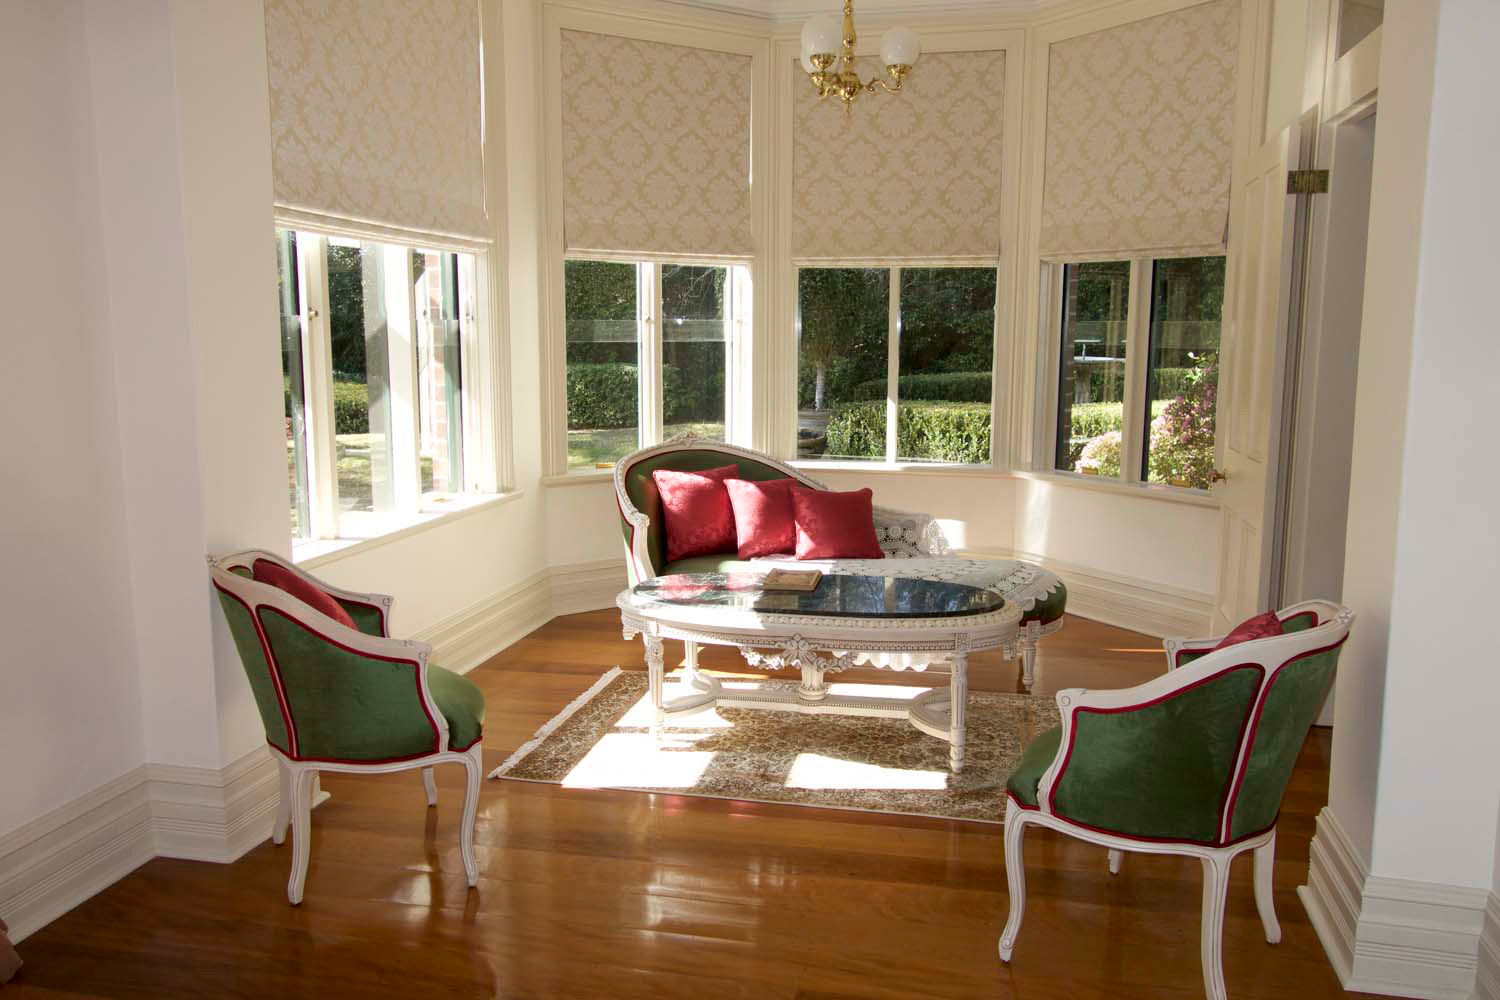 8 Lounge room sitting area with sofas and armchairs in french style in curtain blinds